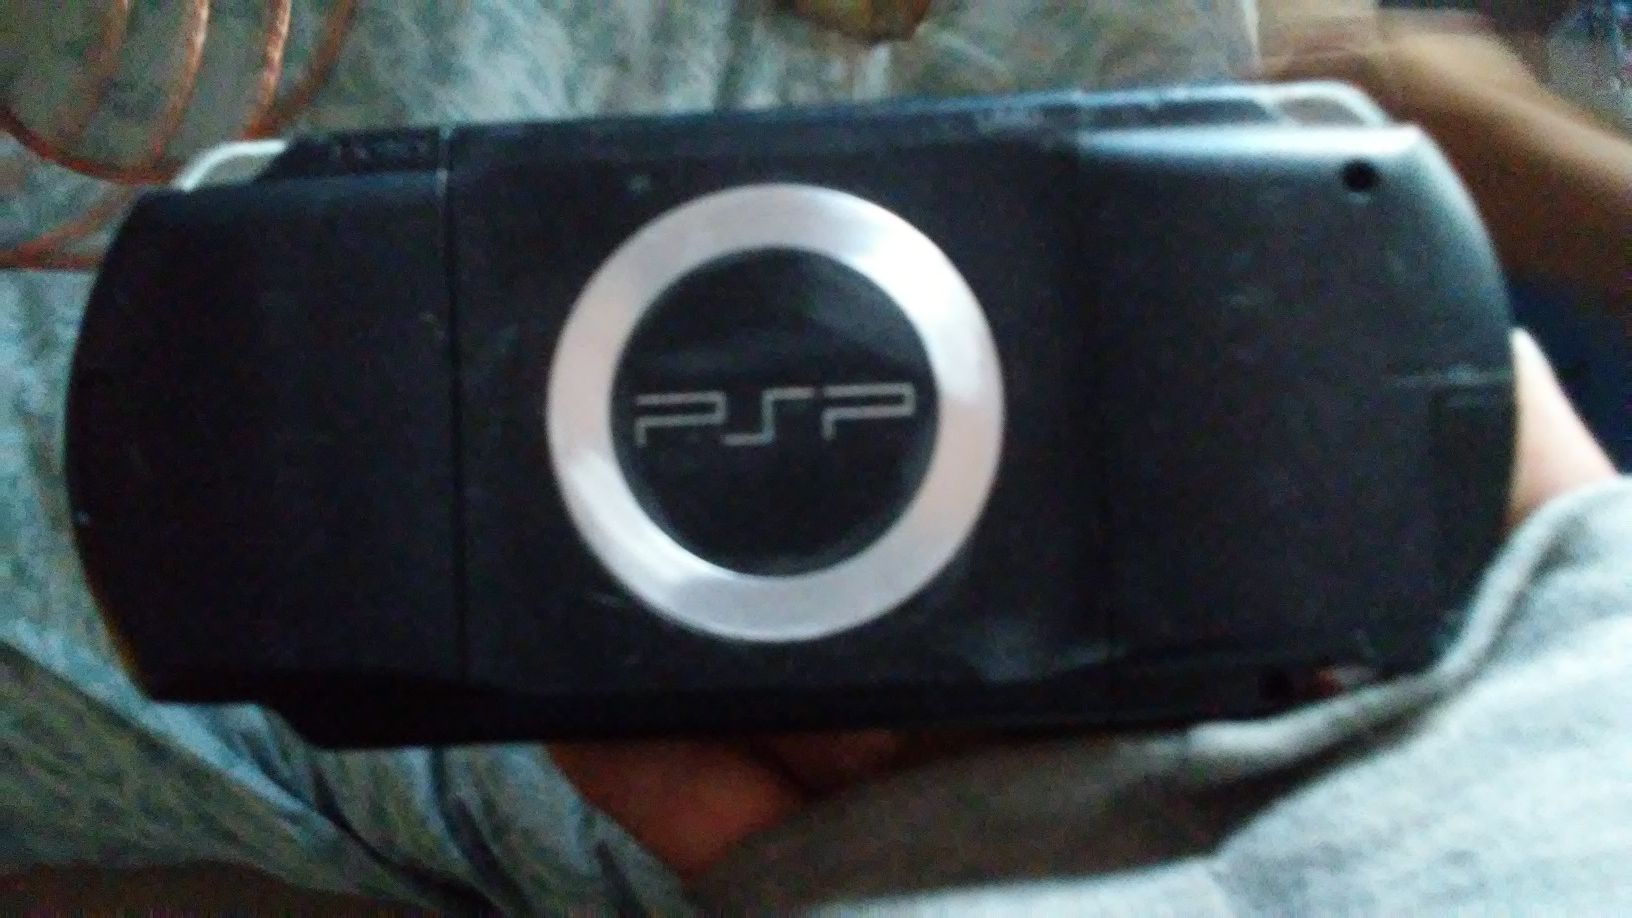 Handheld PSP without charger cord